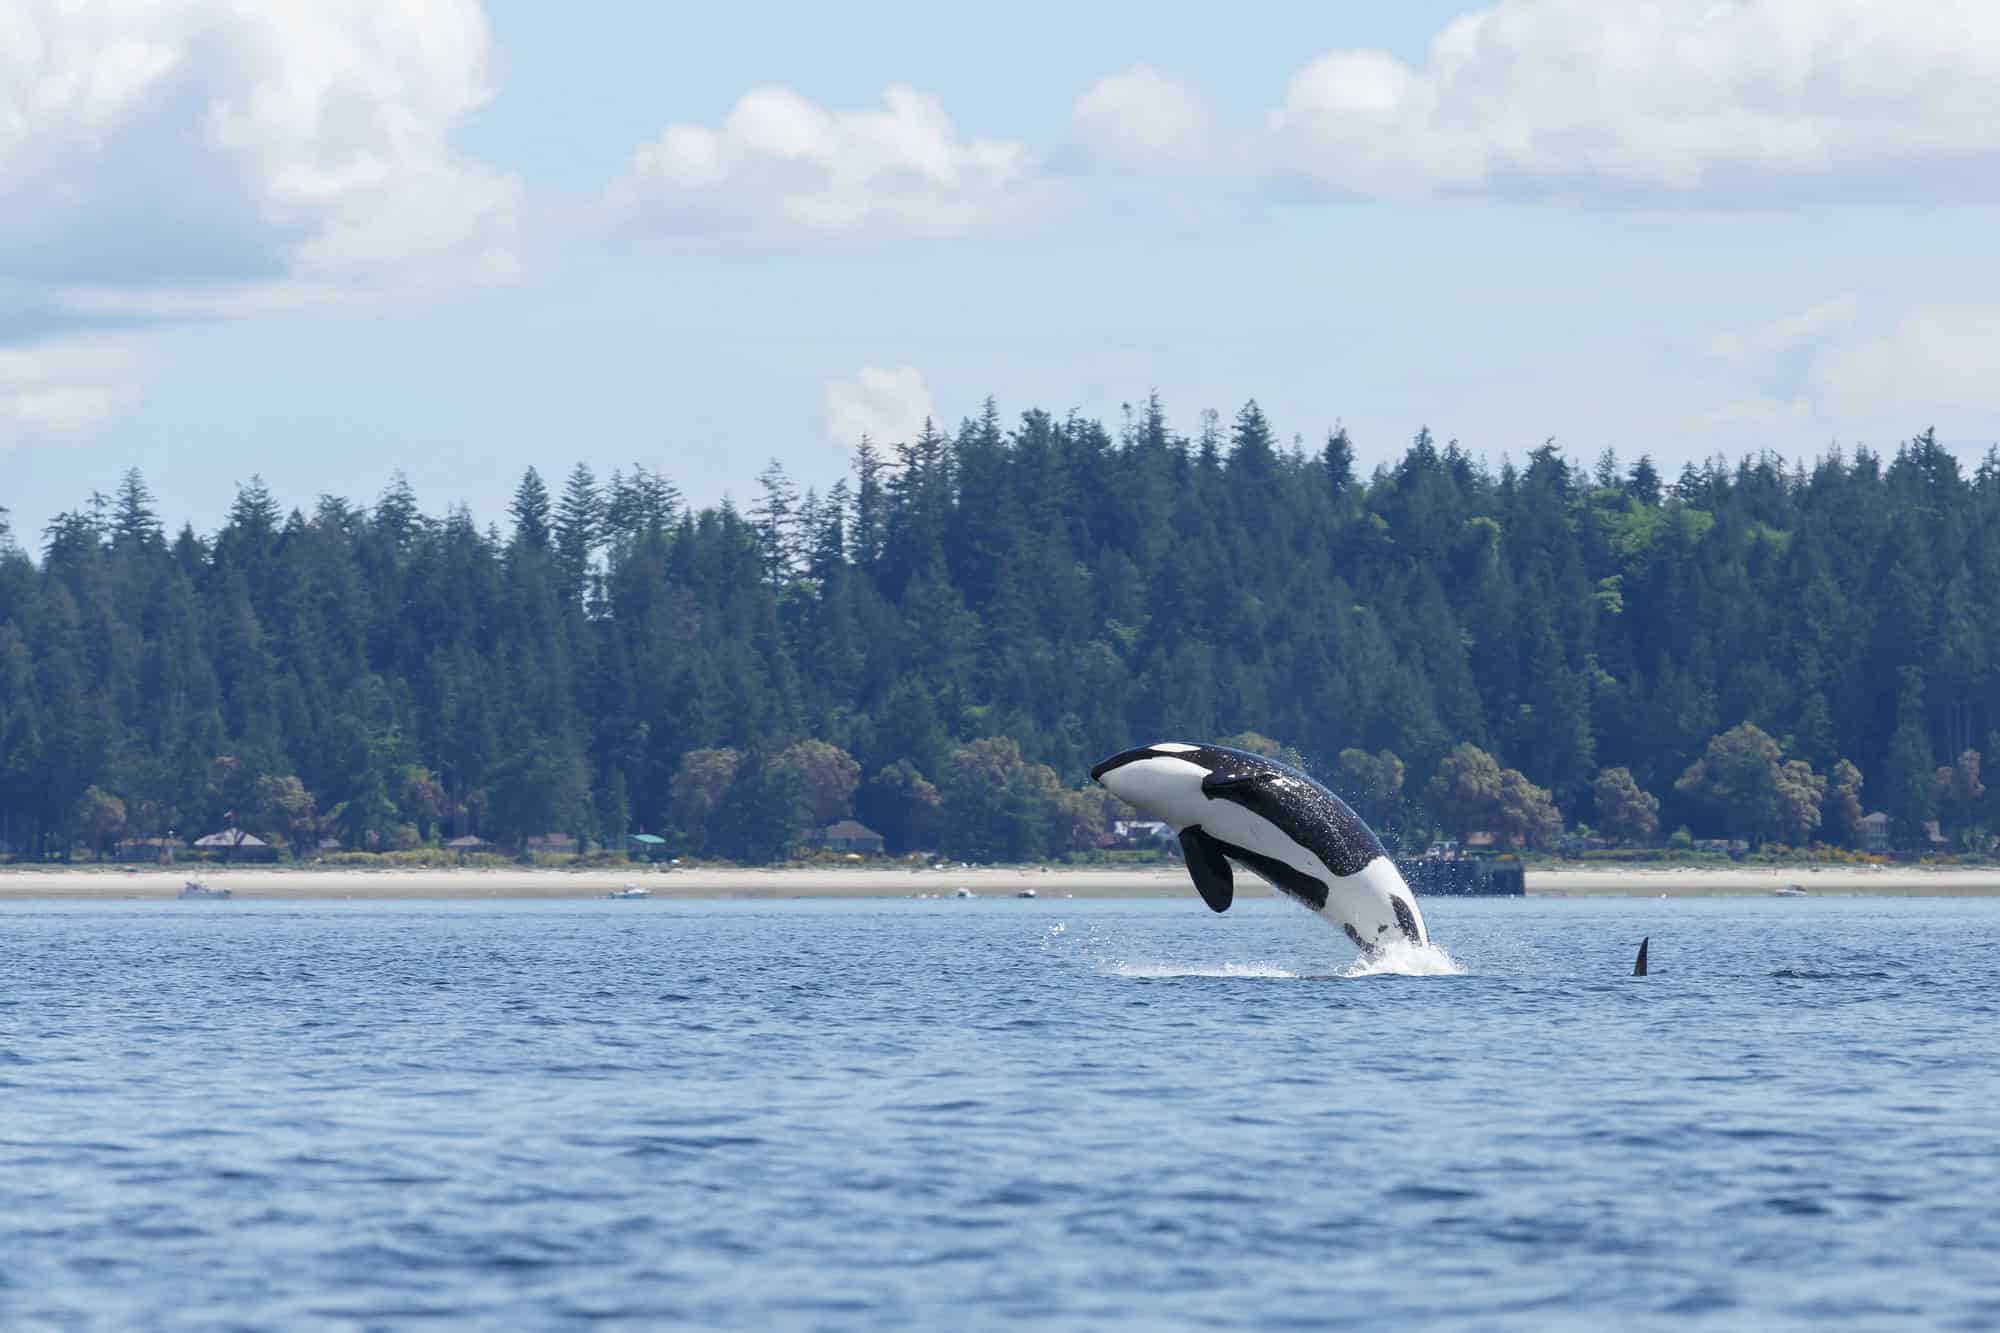 <p>Encounters between <a href="https://www.animalsaroundtheglobe.com/largest-dolphin-ever-recorded-1-166254/">dolphins</a> and orcas in the wild are not uncommon, as their habitats often overlap. However, the dramatic nature of this interaction – with the orca headbutting the dolphin mid-air – is a <a class="wpil_keyword_link" href="https://www.animalsaroundtheglobe.com/top-5-rarest-animals-around-the-globe/" title="rare">rare</a> and startling event, highlighting the raw and wild aspects of wildlife.</p>           Sharks, lions, tigers, as well as all about cats & dogs!           <a href='https://www.msn.com/en-us/channel/source/Animals%20Around%20The%20Globe%20US/sr-vid-ryujycftmyx7d7tmb5trkya28raxe6r56iuty5739ky2rf5d5wws?ocid=anaheim-ntp-following&cvid=1ff21e393be1475a8b3dd9a83a86b8df&ei=10'>           Click here to get to the Animals Around The Globe profile page</a><b> and hit "Follow" to never miss out.</b>